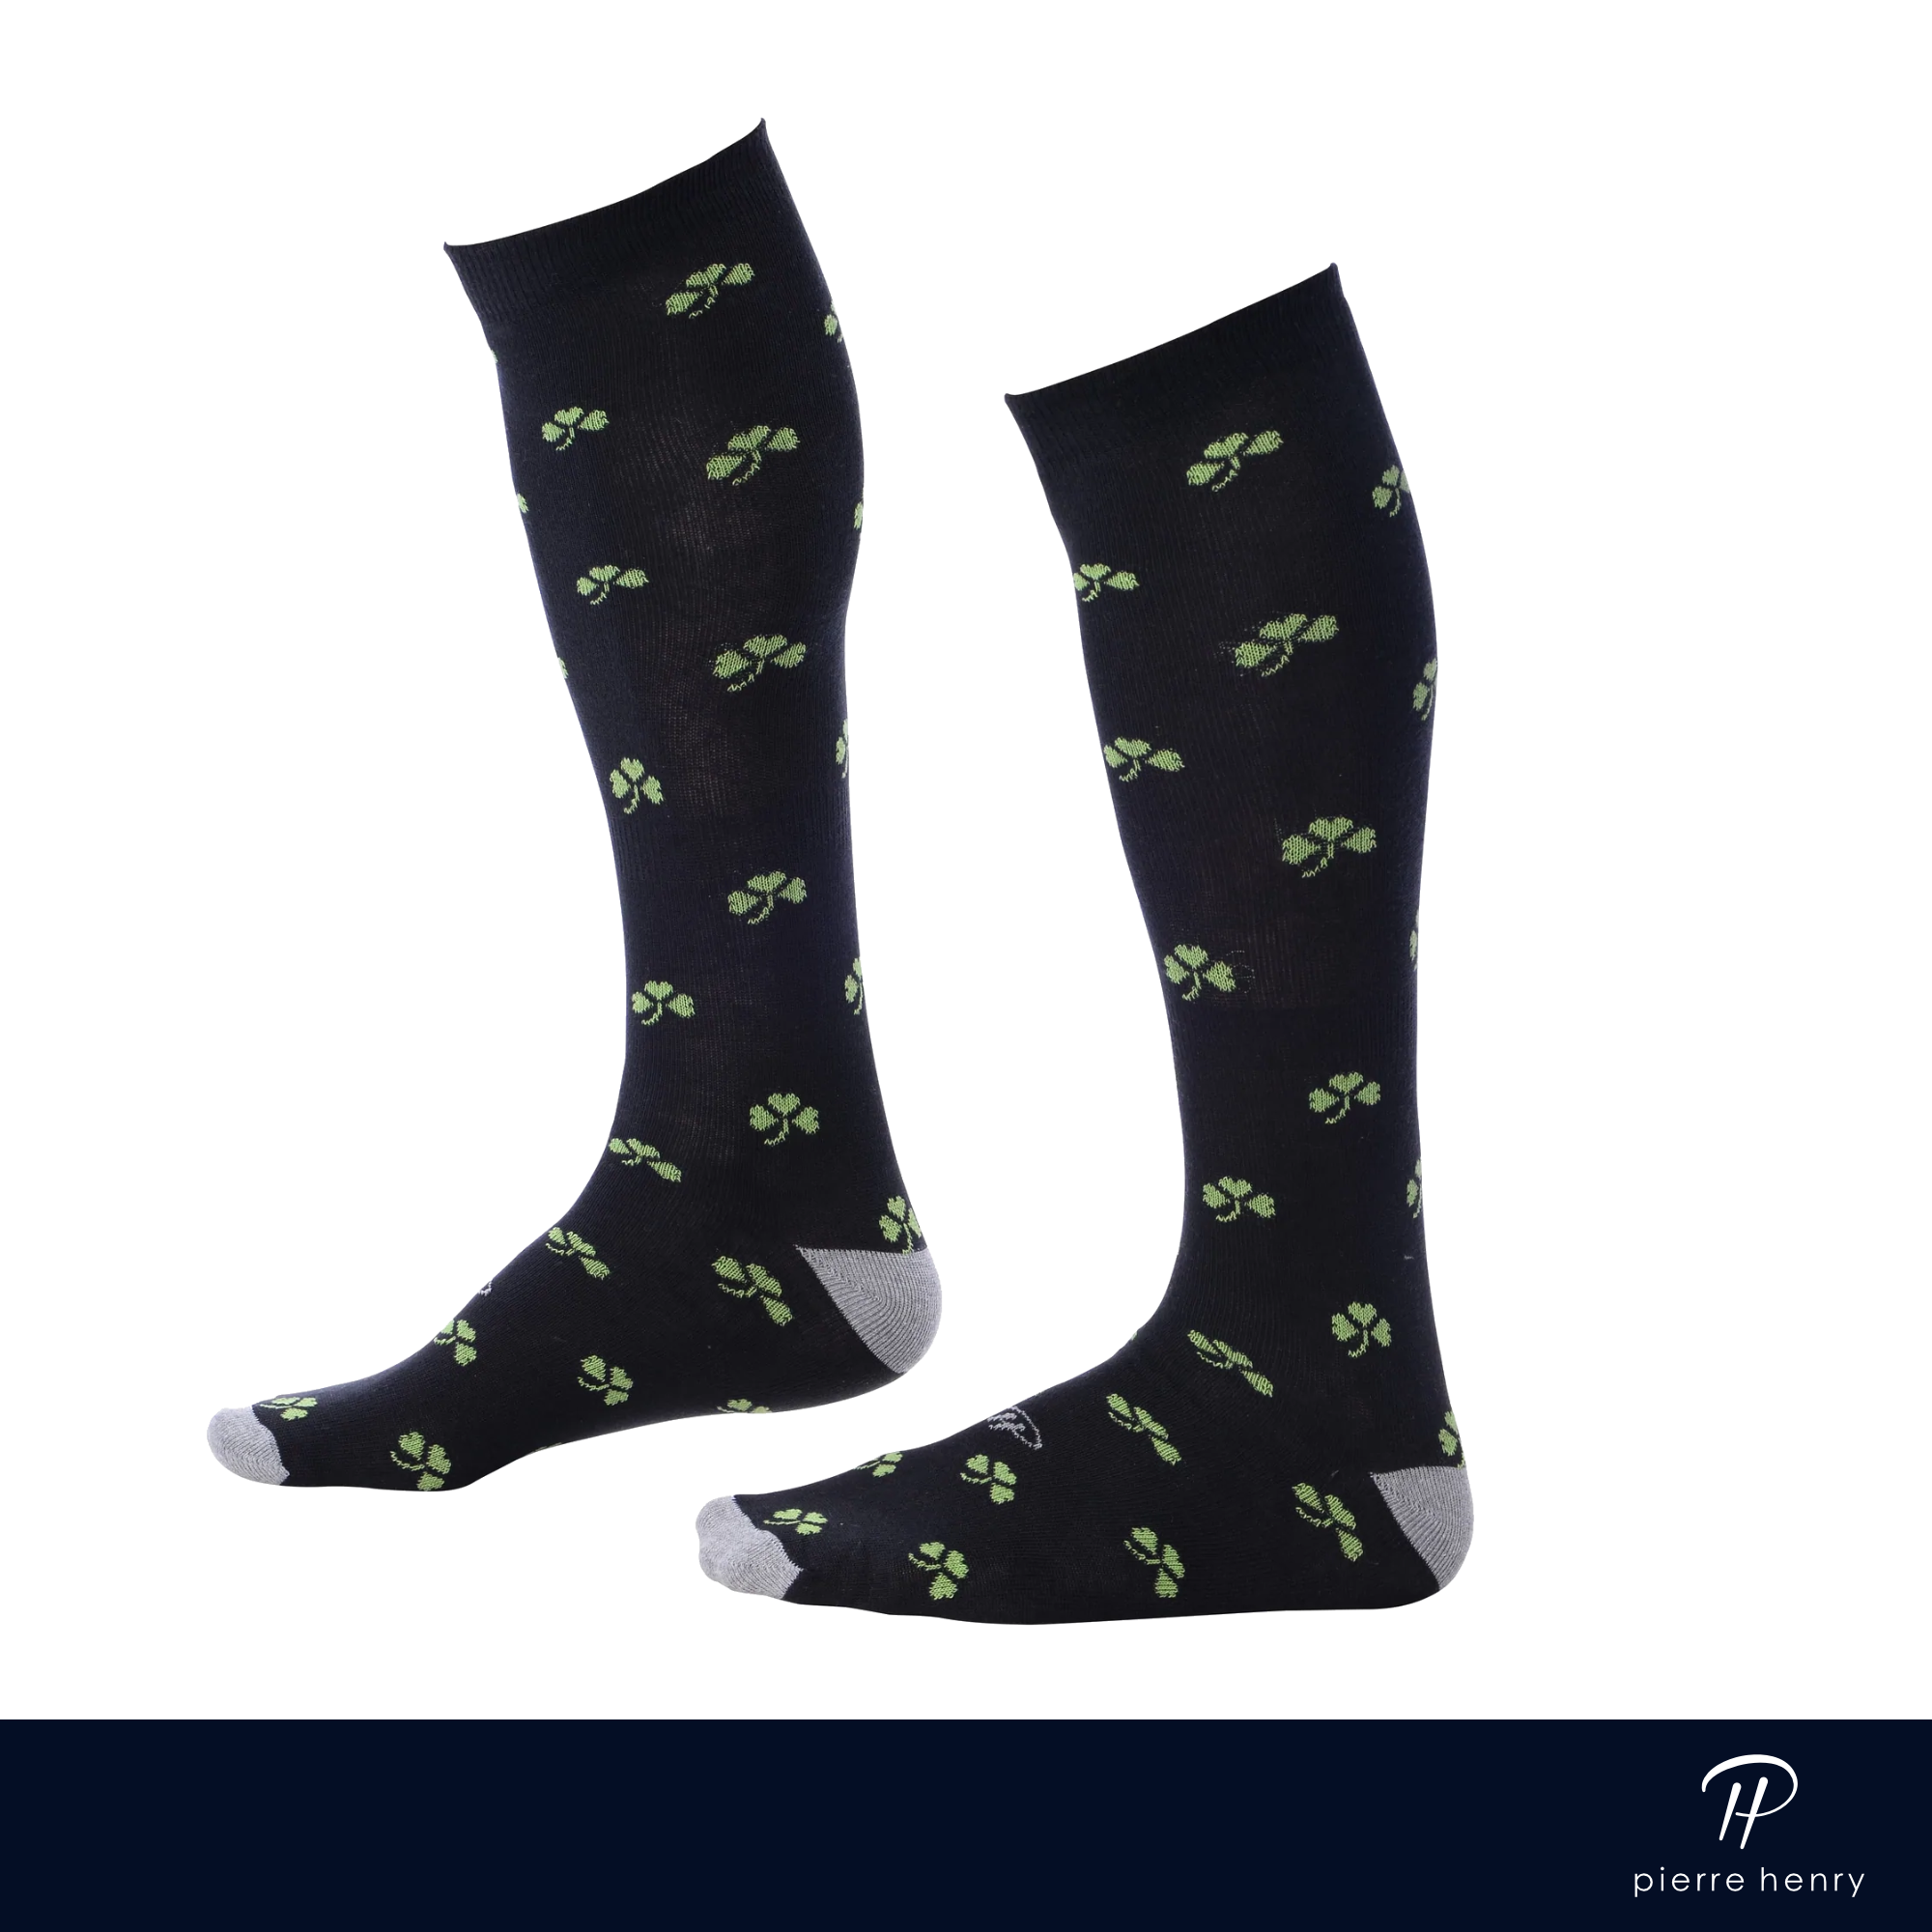 black over the calf dress socks with green clover prints and light grey toe and heel